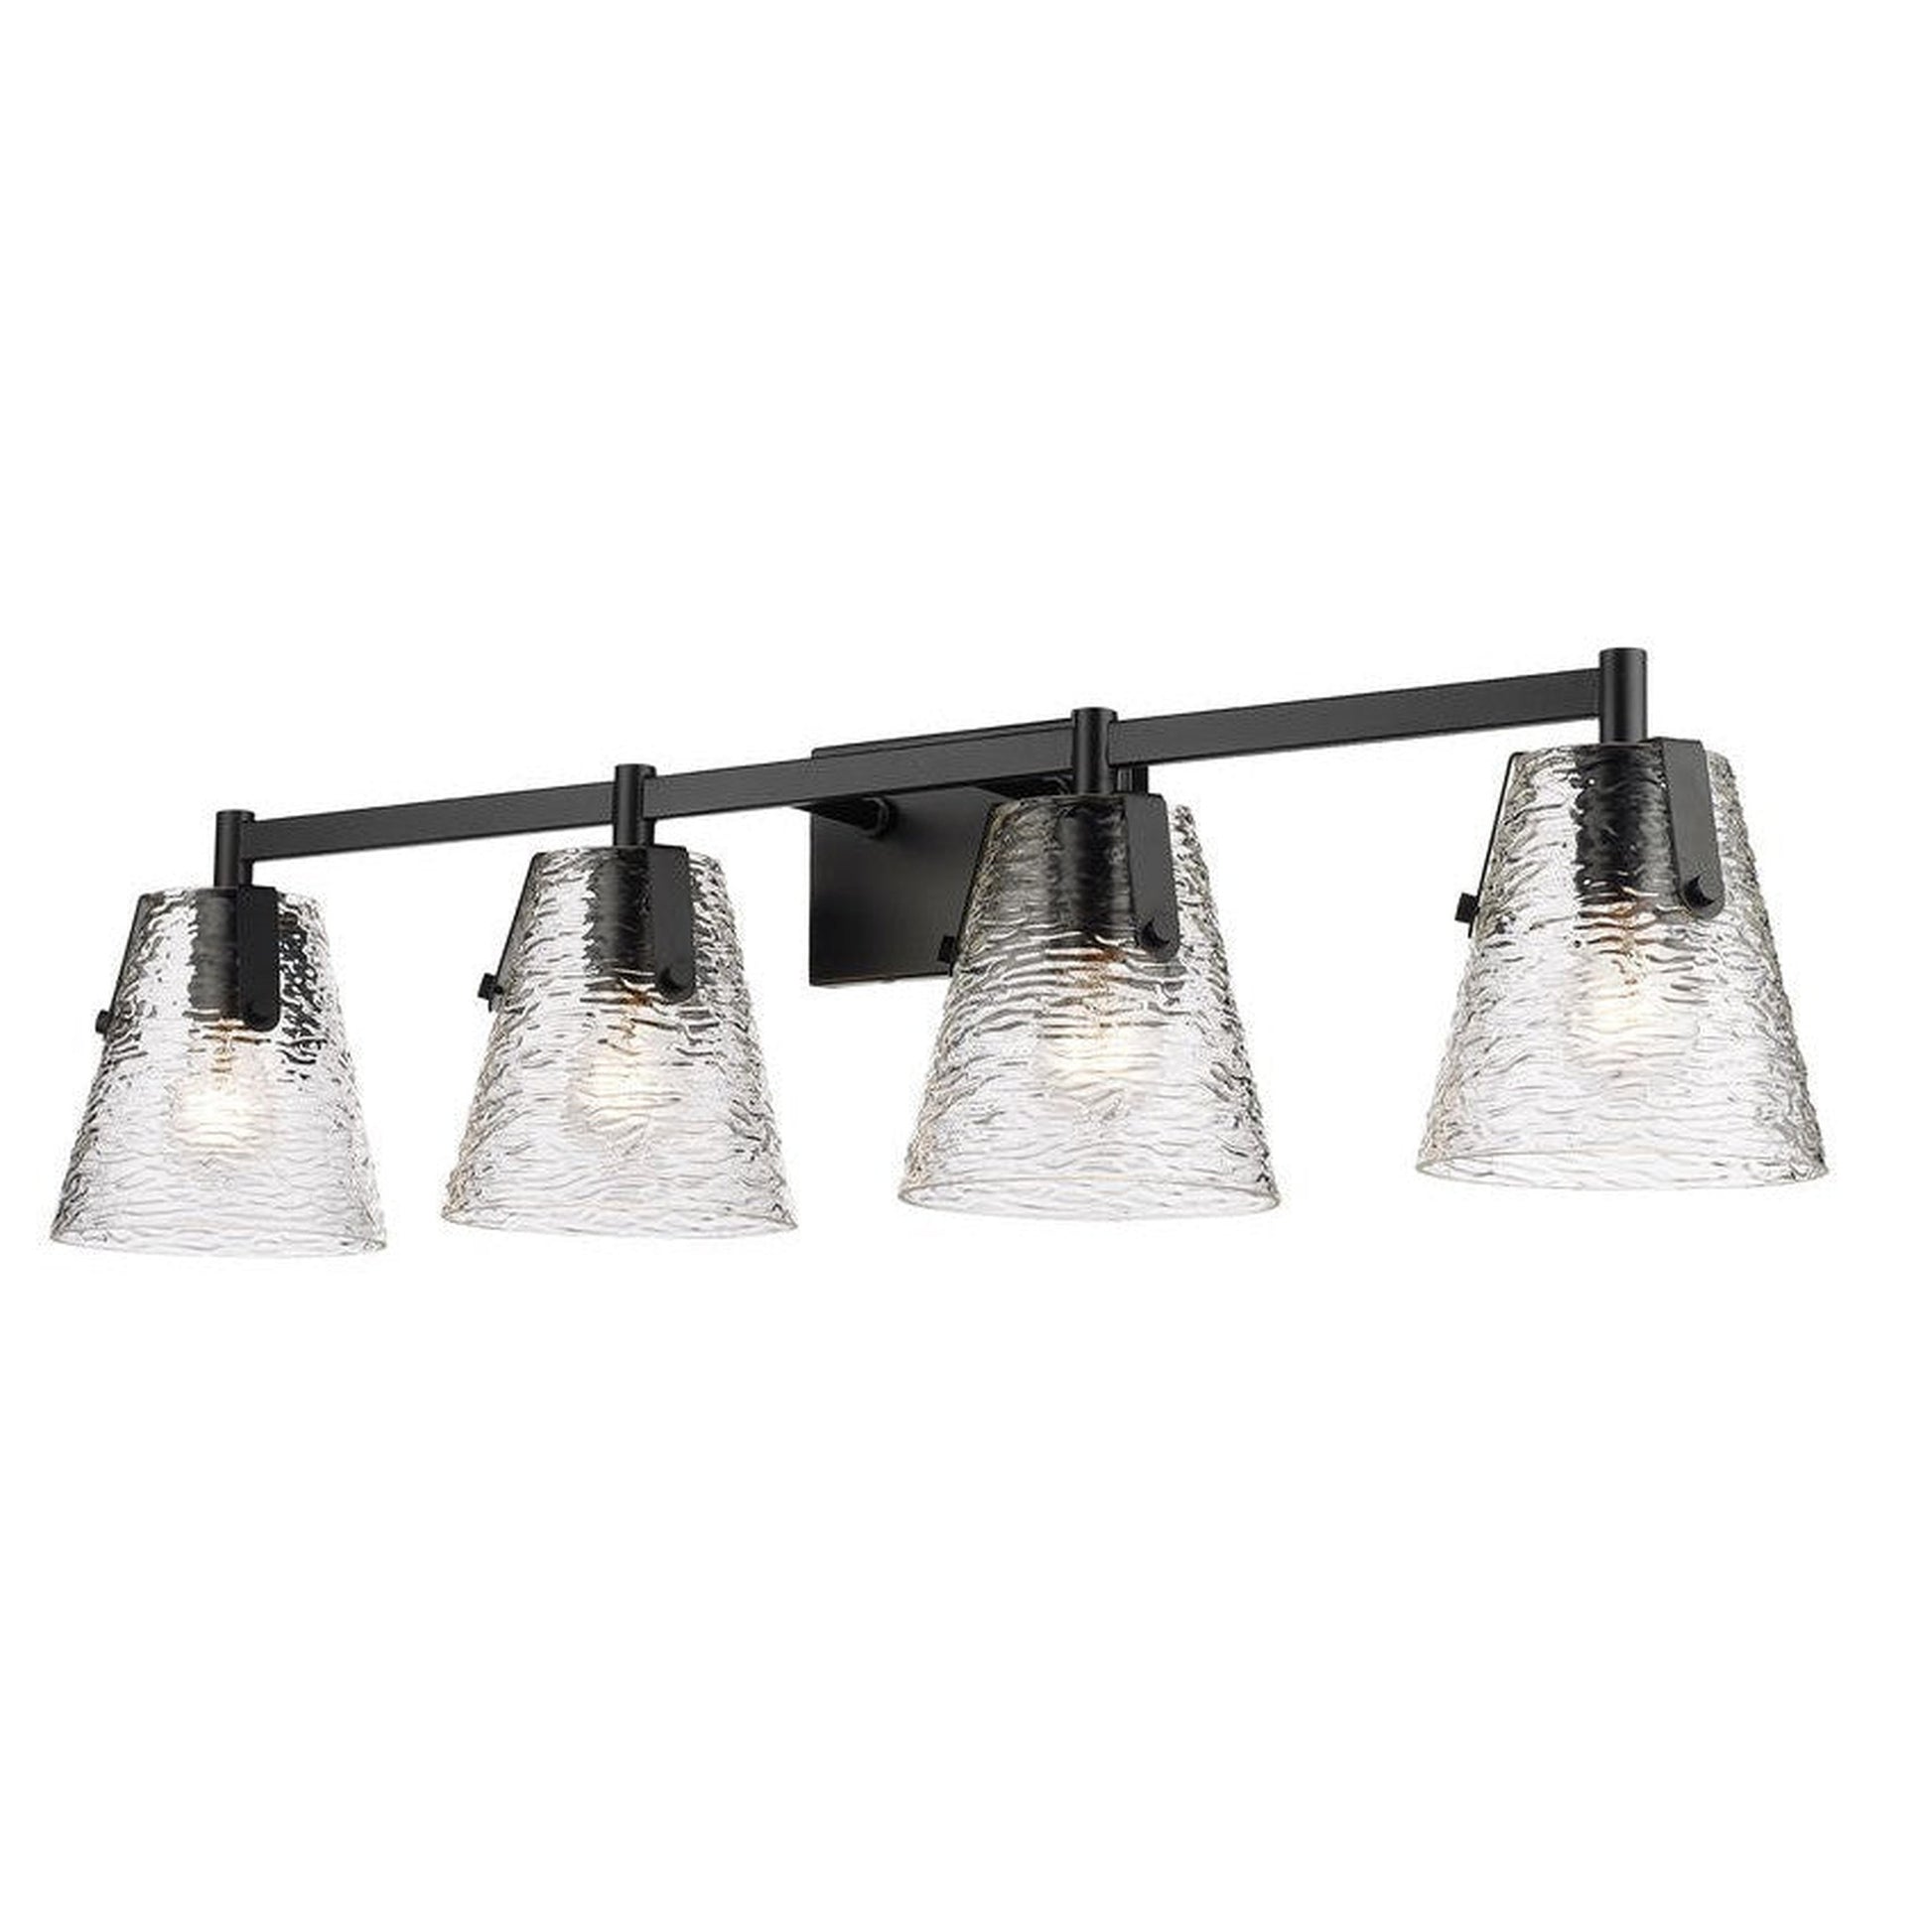 Z-Lite Analia 36" 4-Light Matte Black and Clear Ribbed Glass Shade Vanity Light